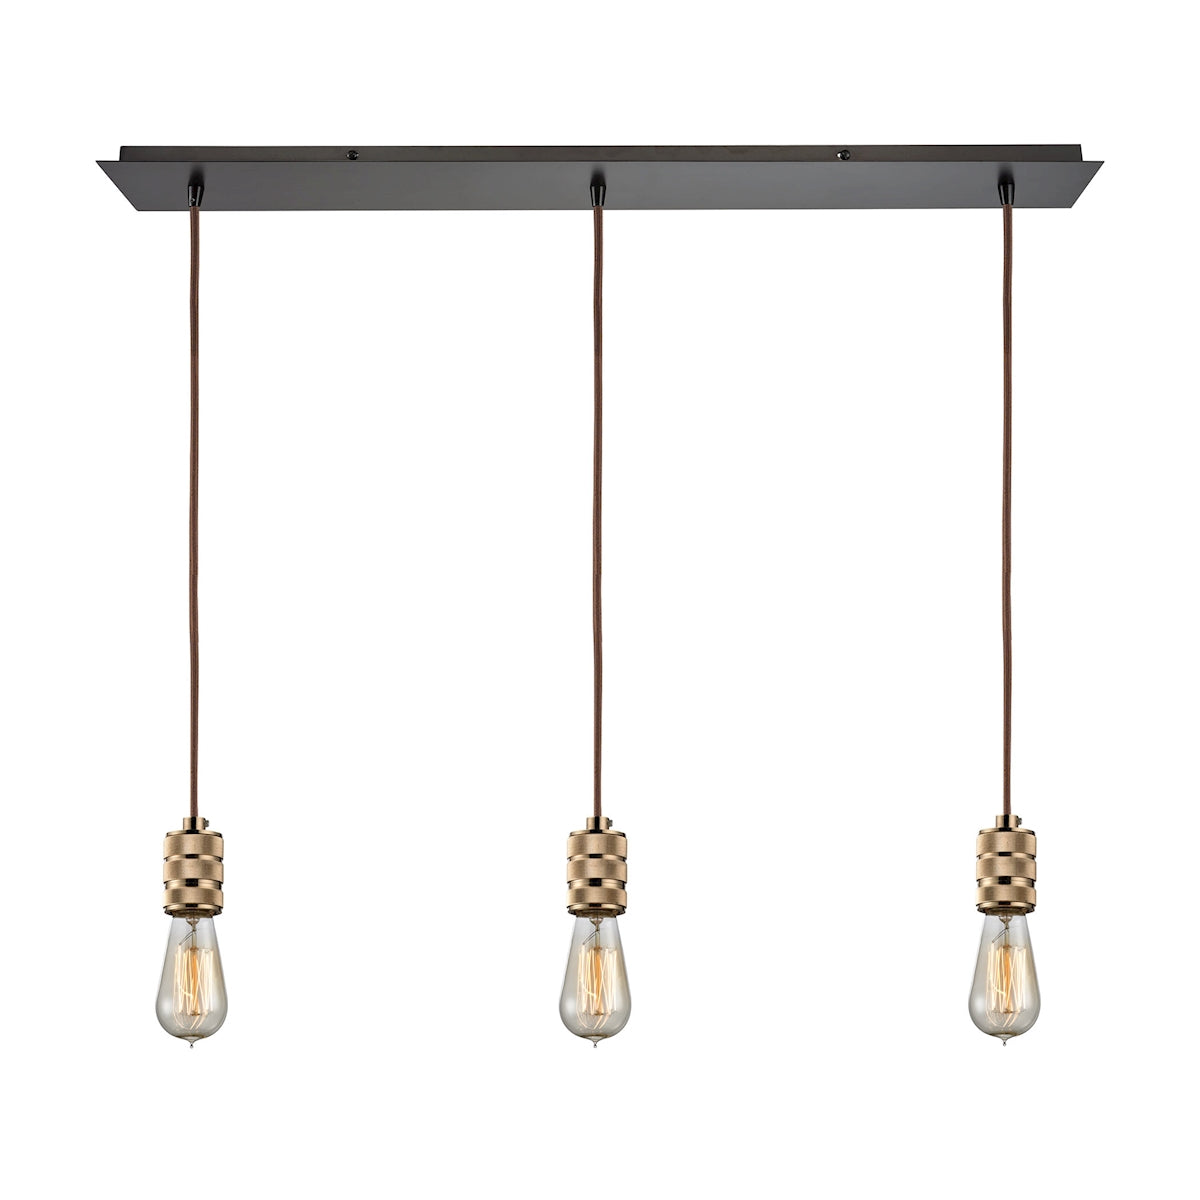 ELK Lighting 14391/3LP Camley 3-Light Linear Mini Pendant Fixture in Oil Rubbed Bronze and Polished Gold